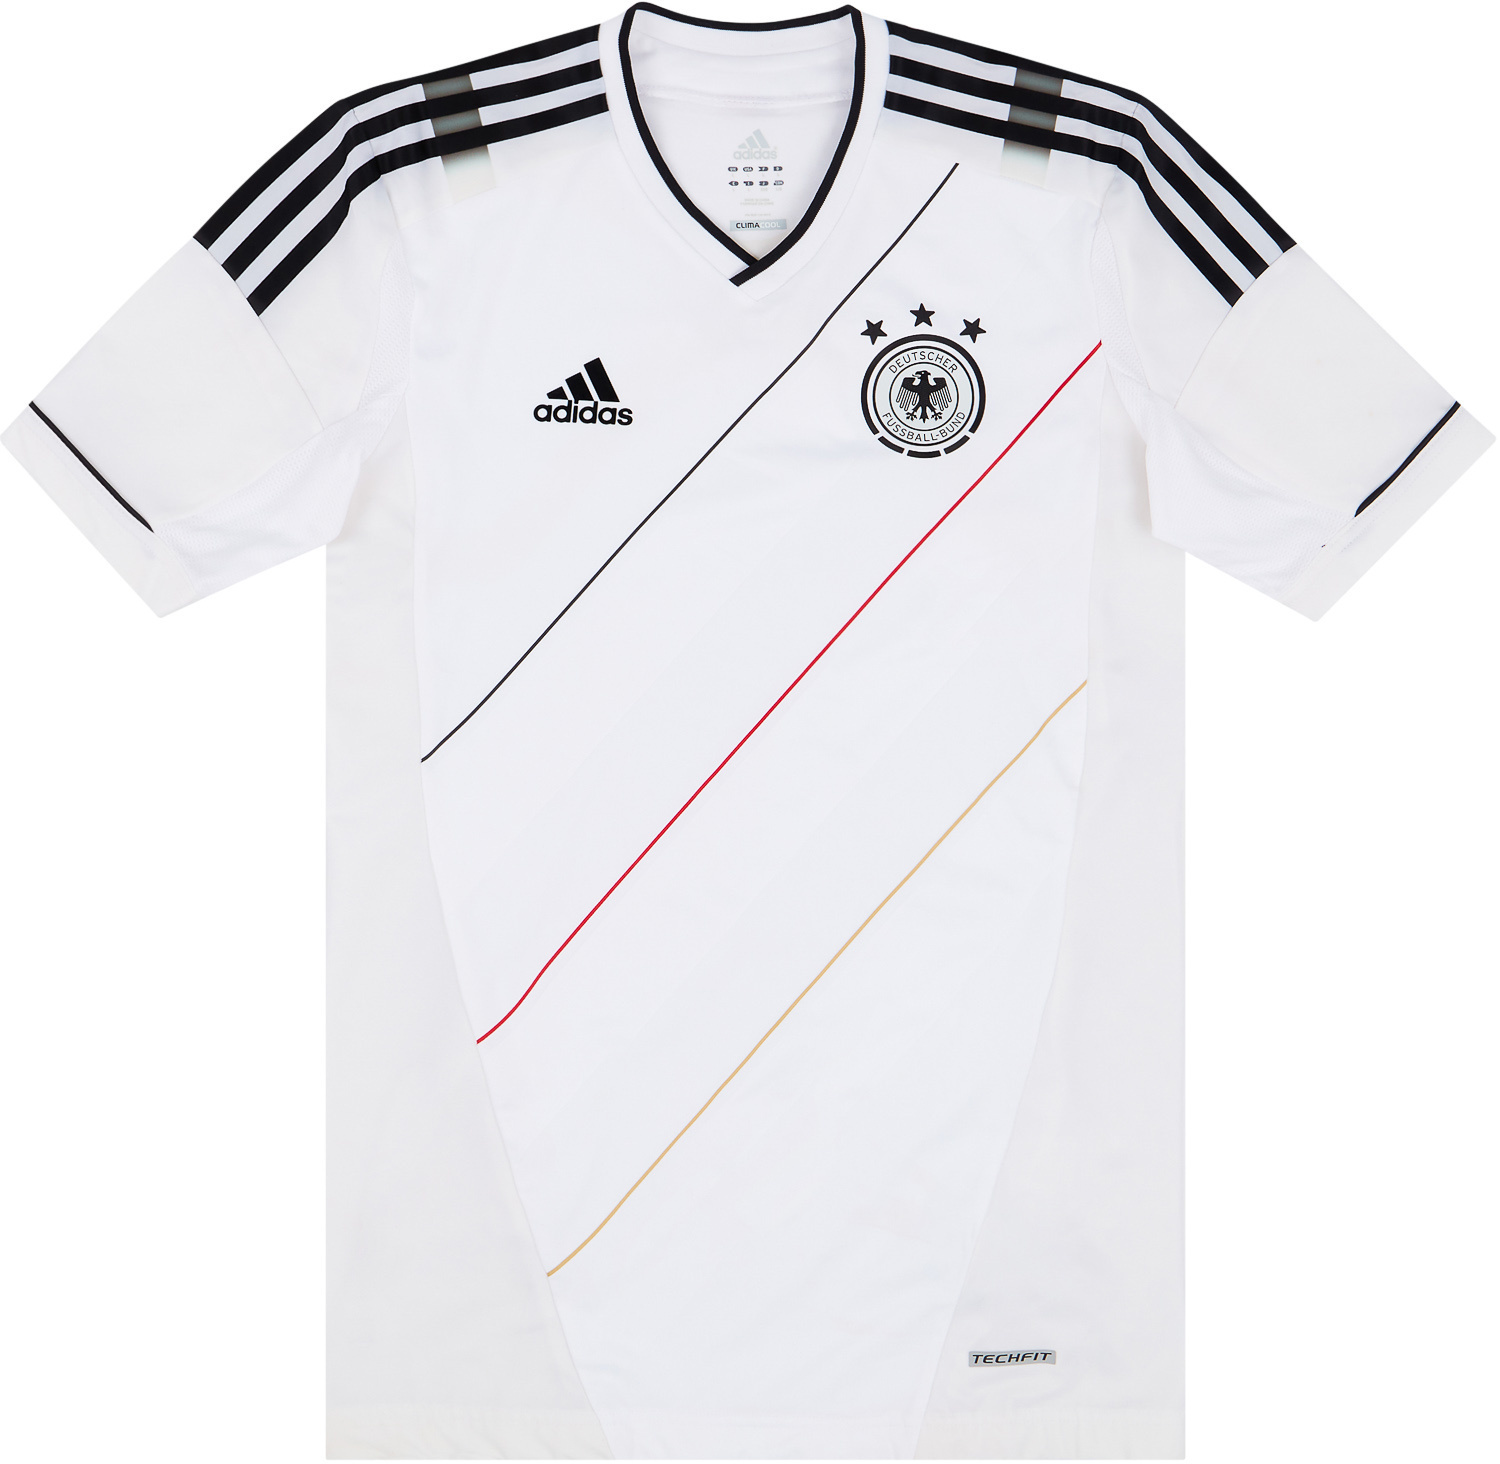 2012-13 Germany Player Issue Techfit Home Shirt - 8/10 - ()